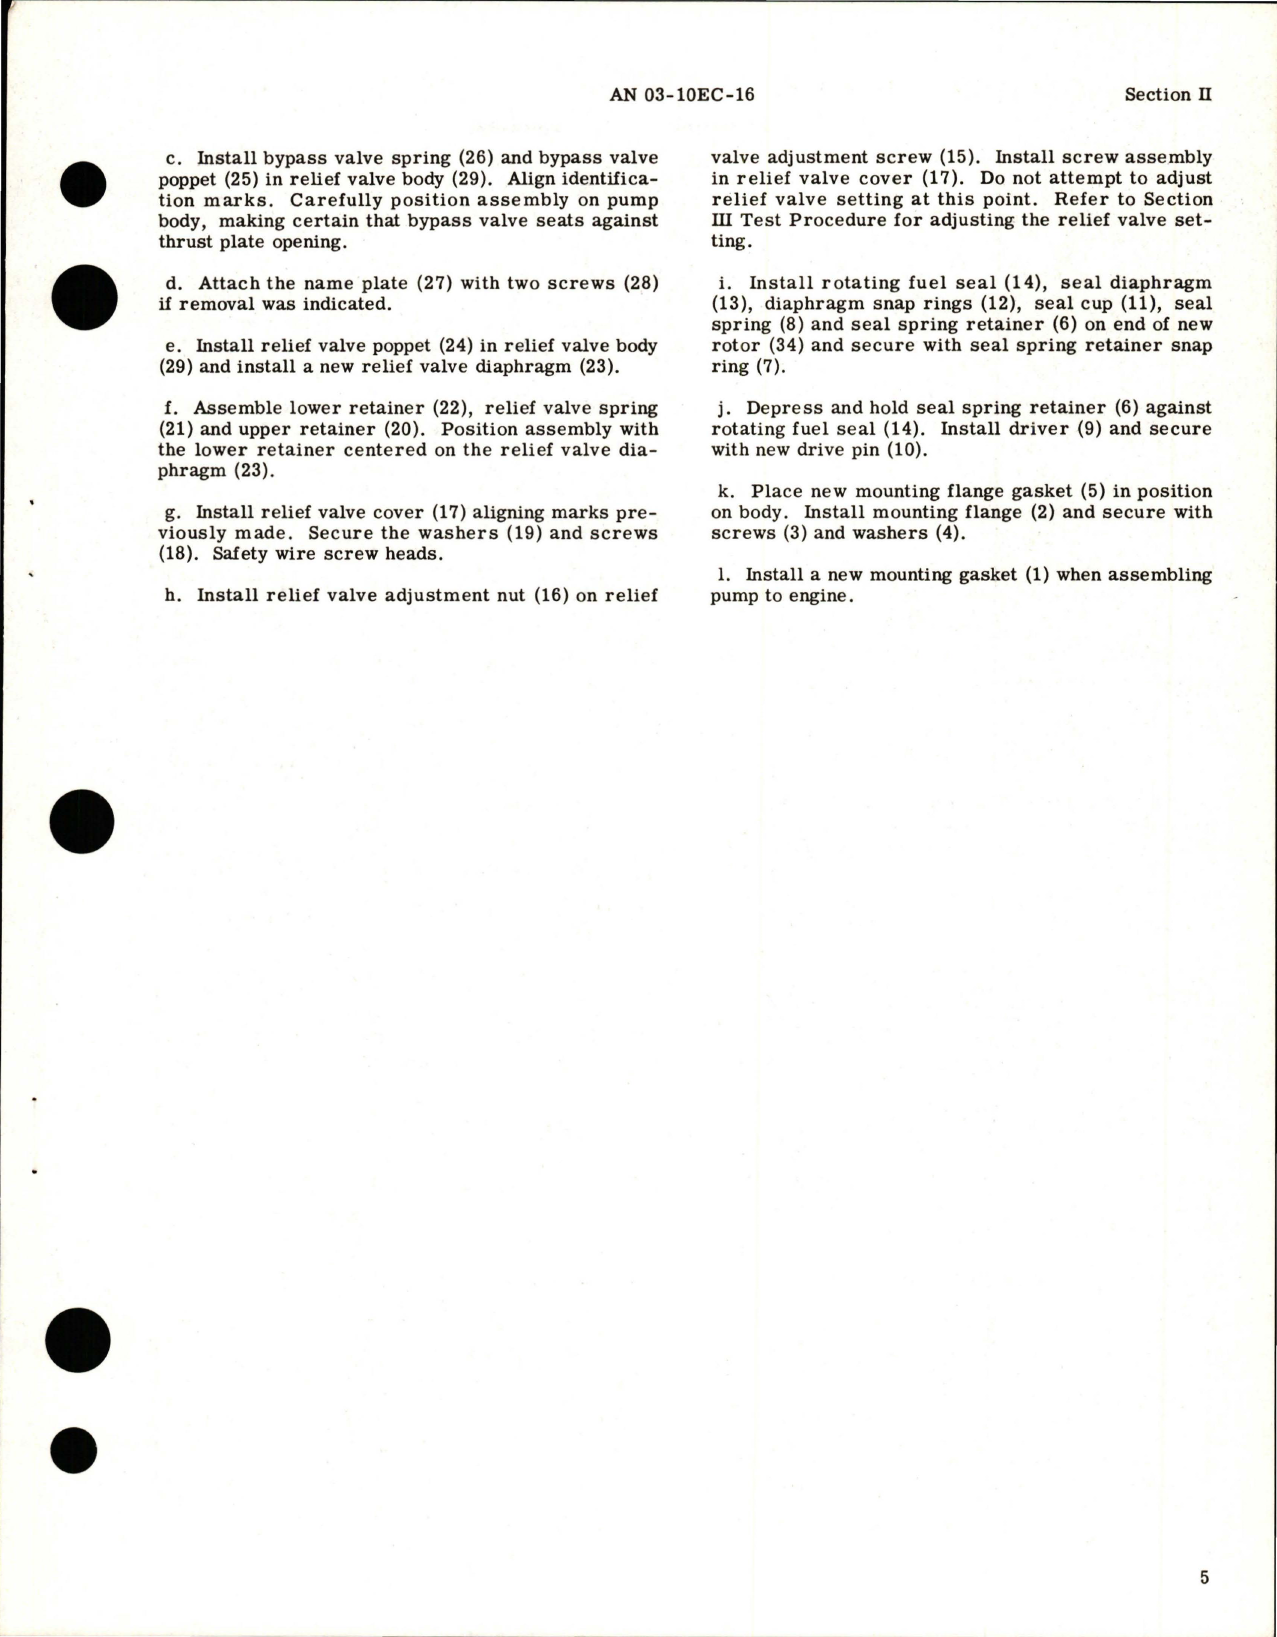 Sample page 7 from AirCorps Library document: Overhaul Instructions for Engine and Electric Motor Driven Fuel Pump